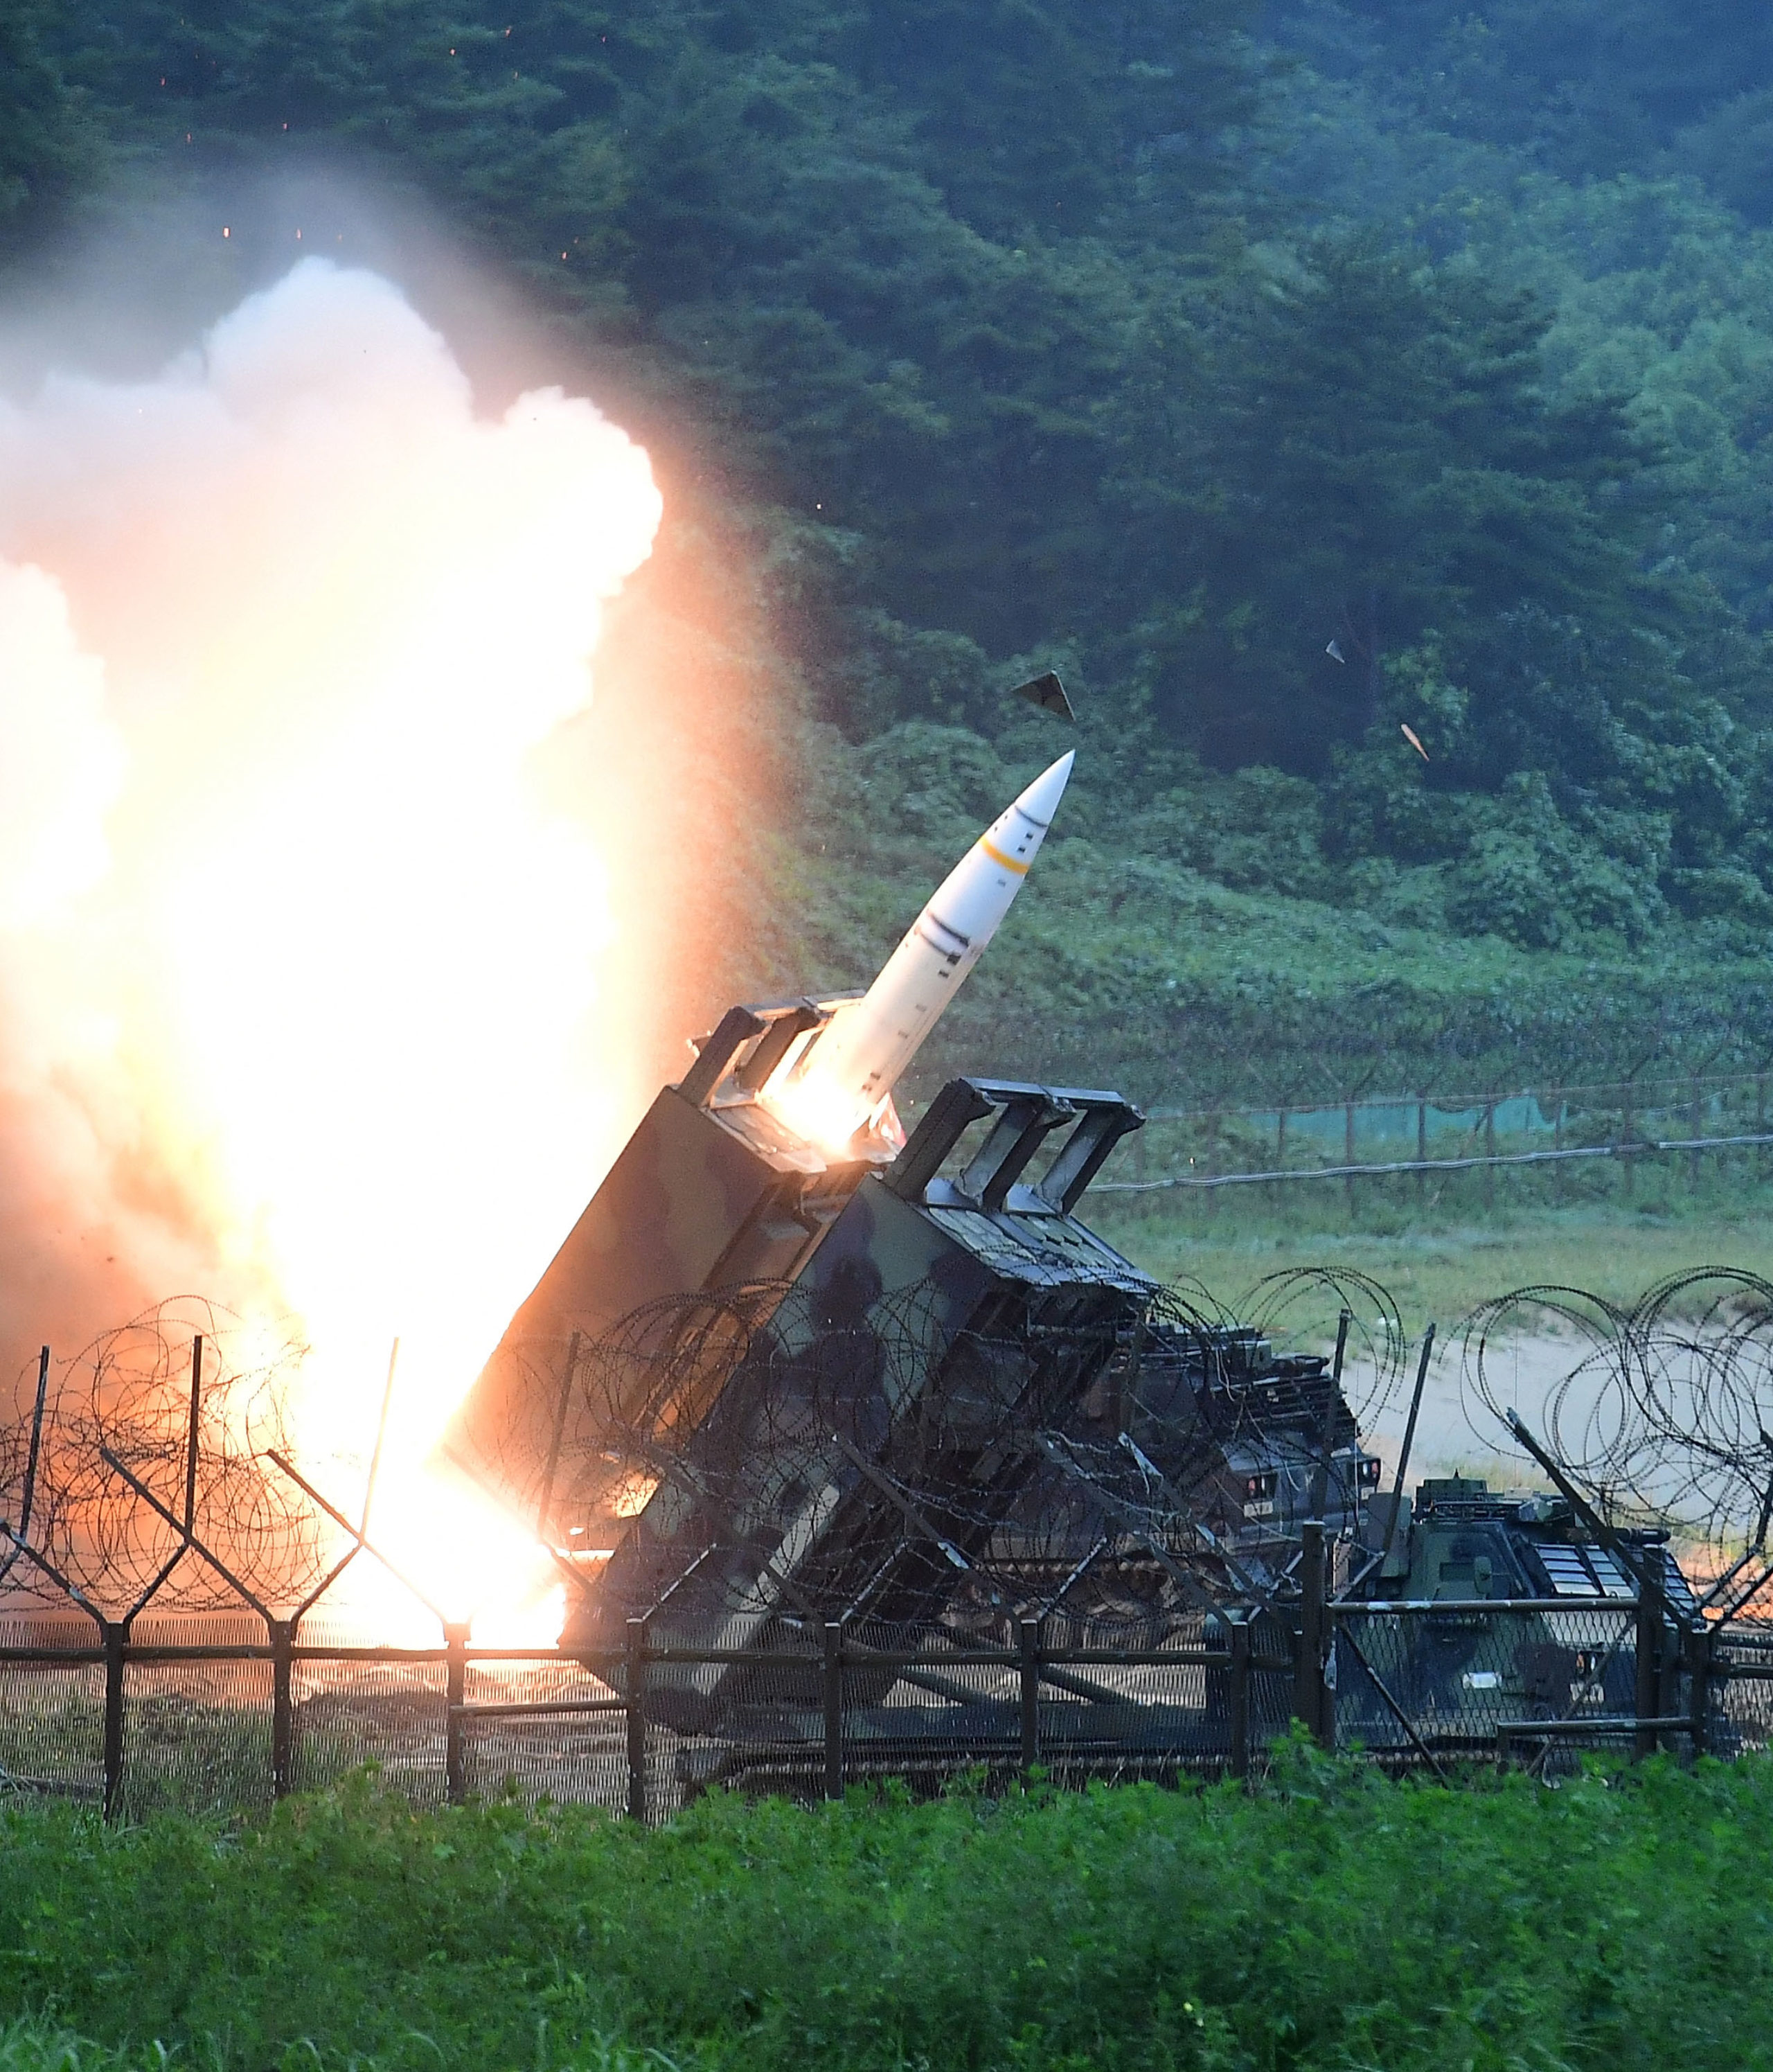 EAST COAST, SOUTH KOREA - JULY 29: In this handout photo released by the South Korean Defense Ministry, U.S. Army Tactical Missile System (ATACMS) firing a missile into the East Sea during a South Korea-U.S. joint missile drill aimed to counter North Korea¡¯s ICBM test on July 29, 2017 in East Coast, South Korea. North Korea launched another test missile, believed to be an Inter Continental Ballistic Missile (ICBM), which travelled 45 minutes before splashing down in the Exclusive Economic Zone (EEZ) of Japan.